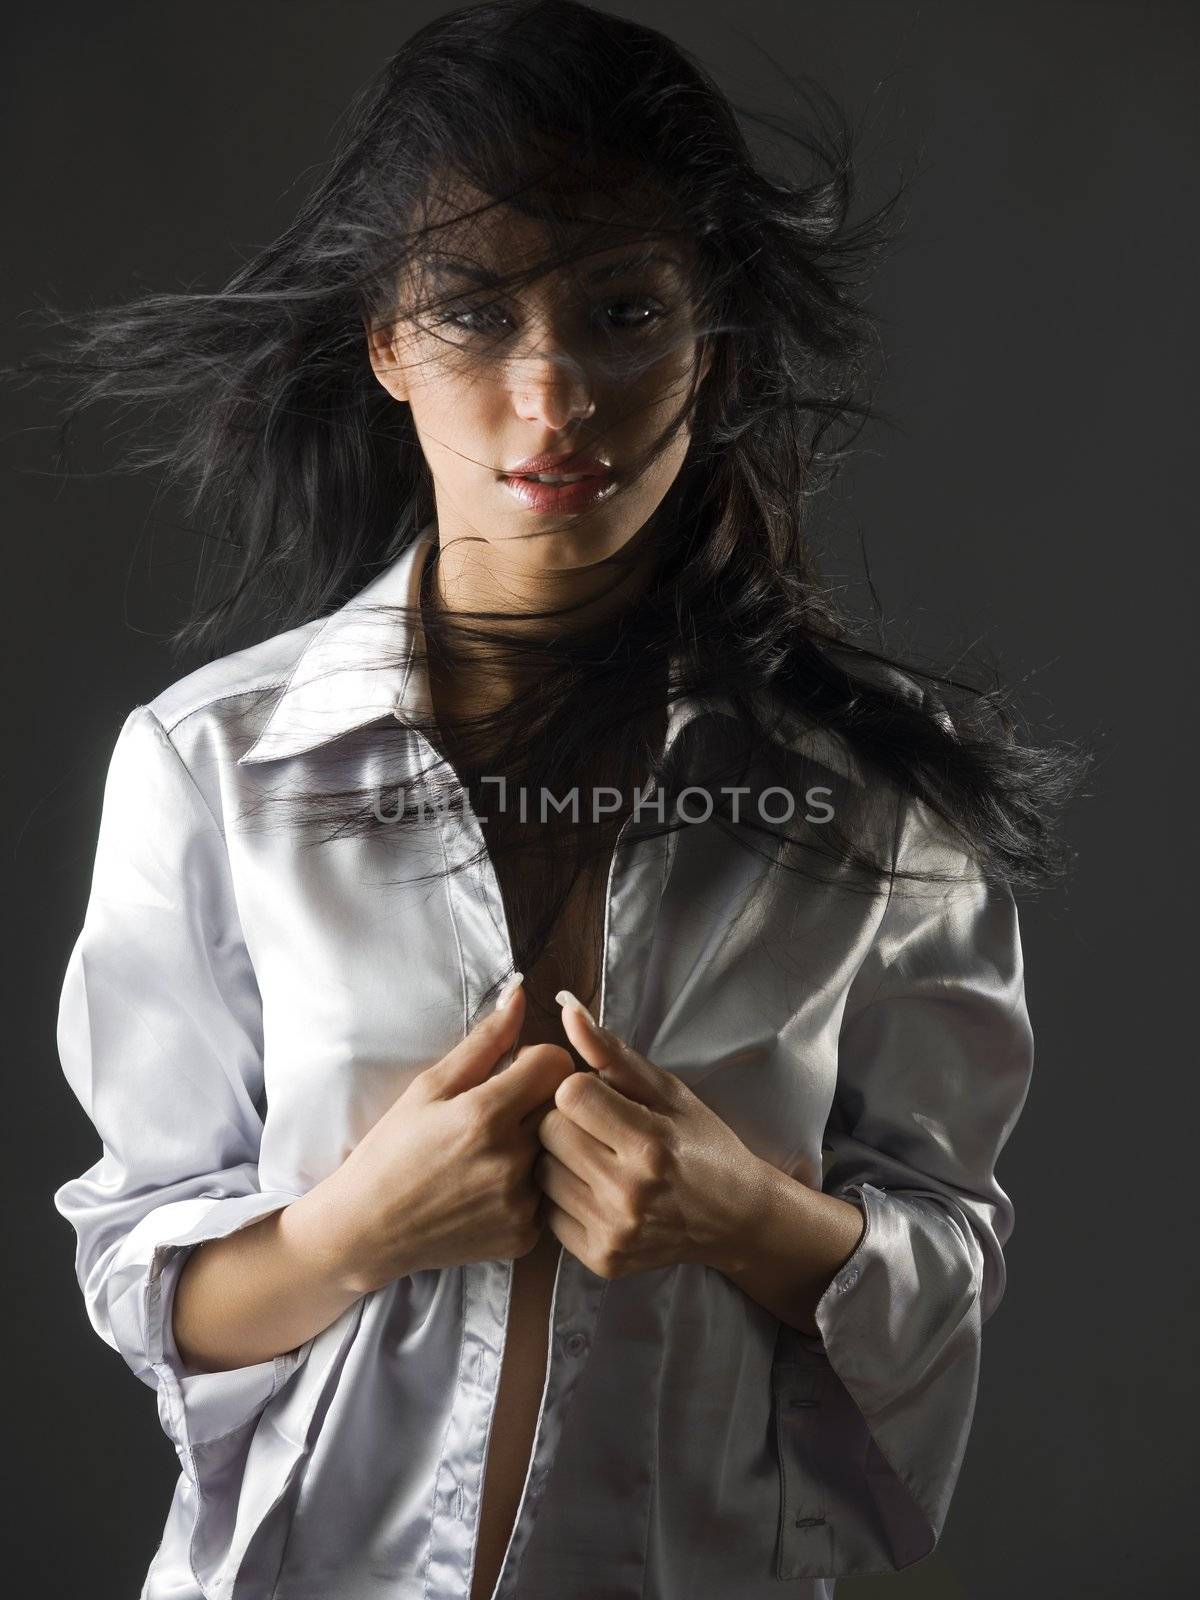 beautiful portrait of a young and very cute latina girl with a fatal look and the hair flying on her face